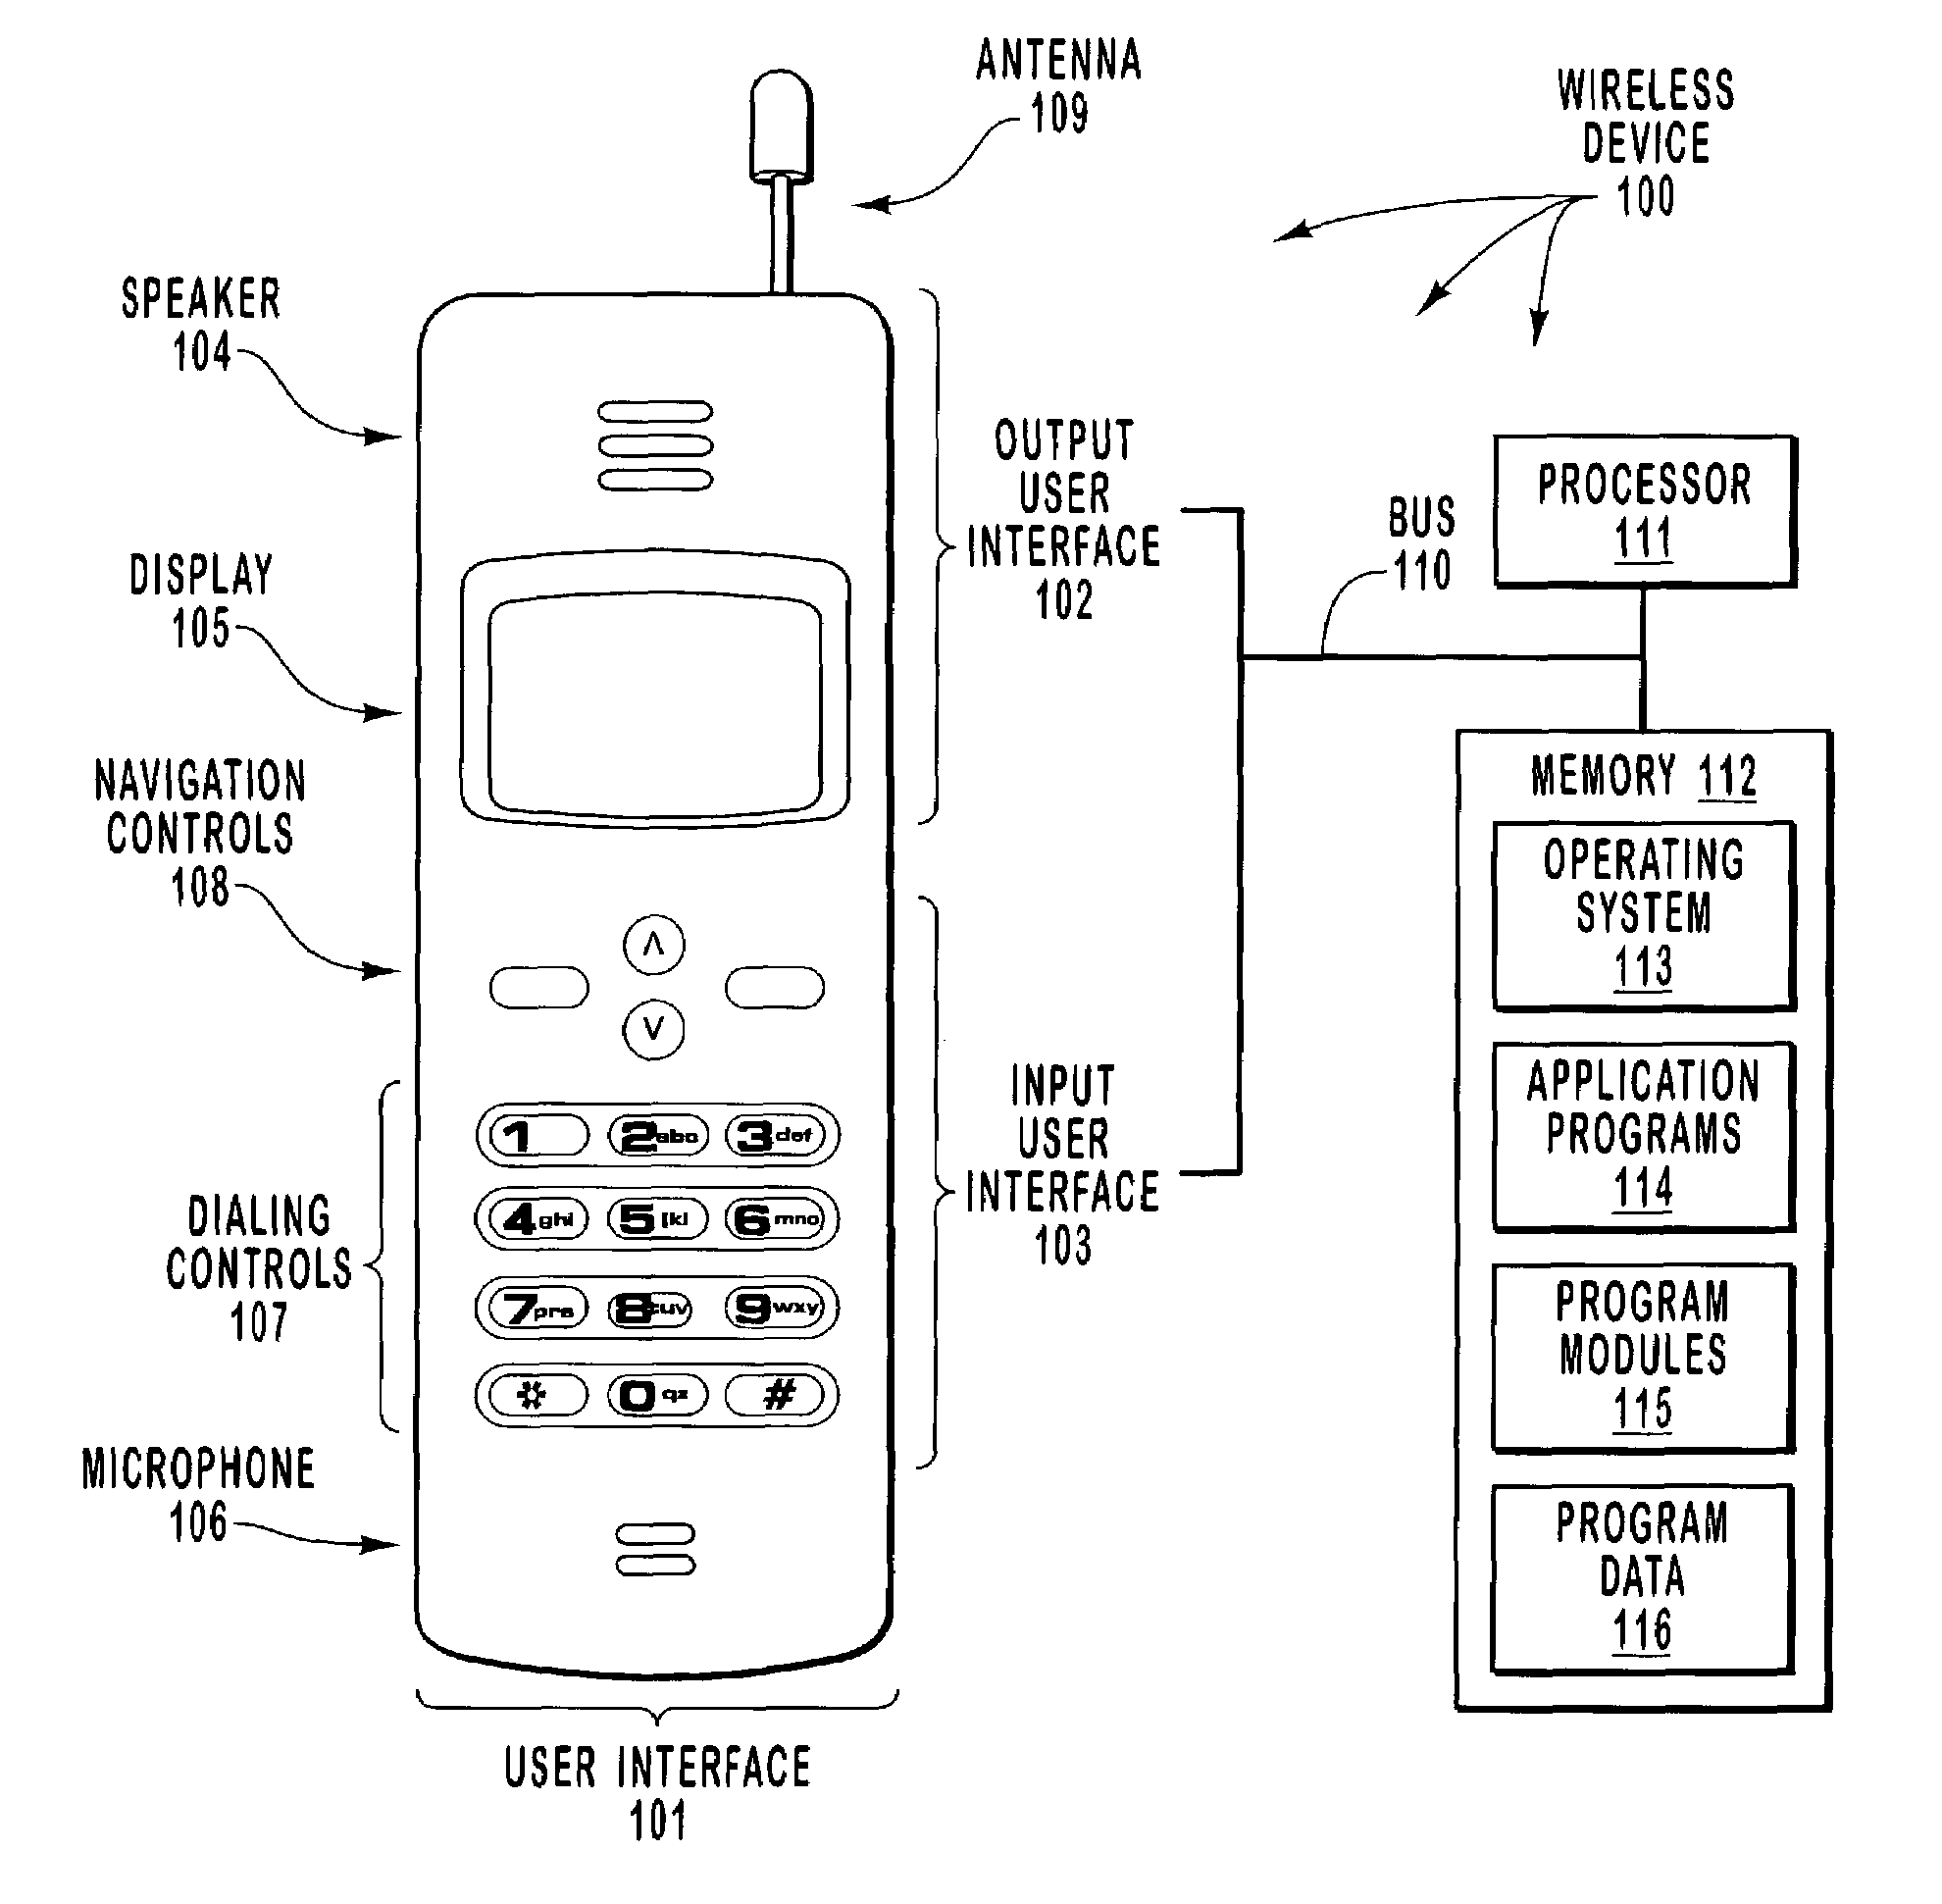 Selective pre-authentication to anticipated primary wireless access points